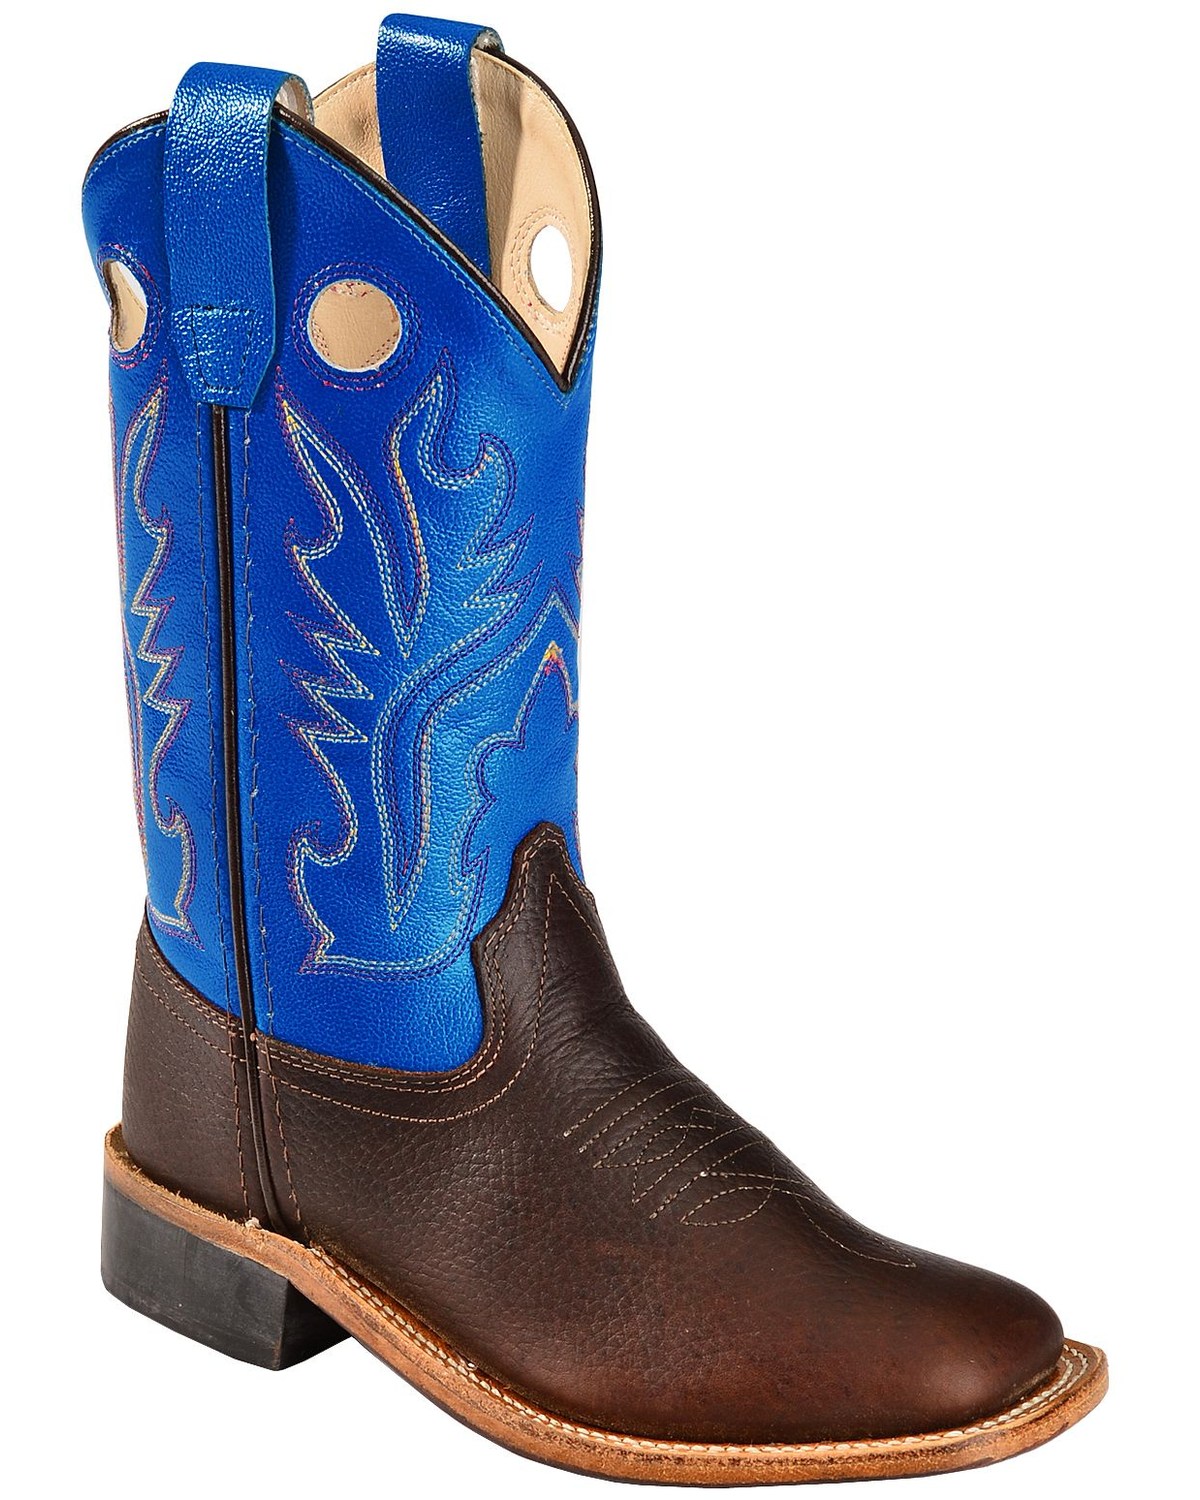 Cody James Boys' Thunder Western Boots - Broad Square Toe